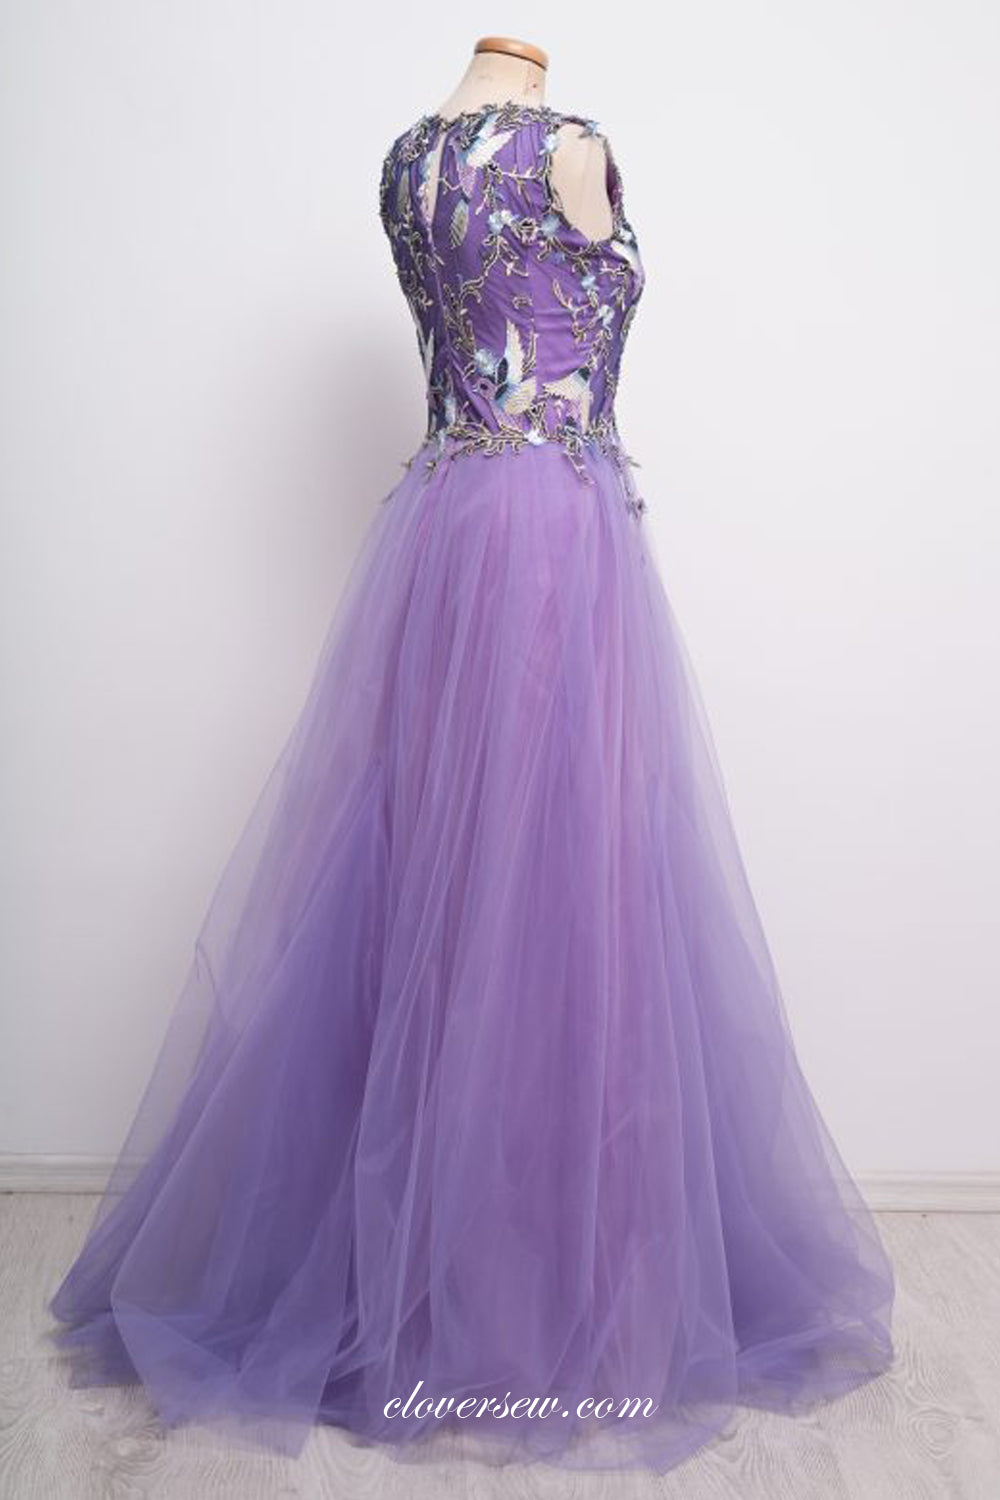 Lilac 3D Embroidery Applique Tulle A-line Fashion Prom Dresses, CP0702